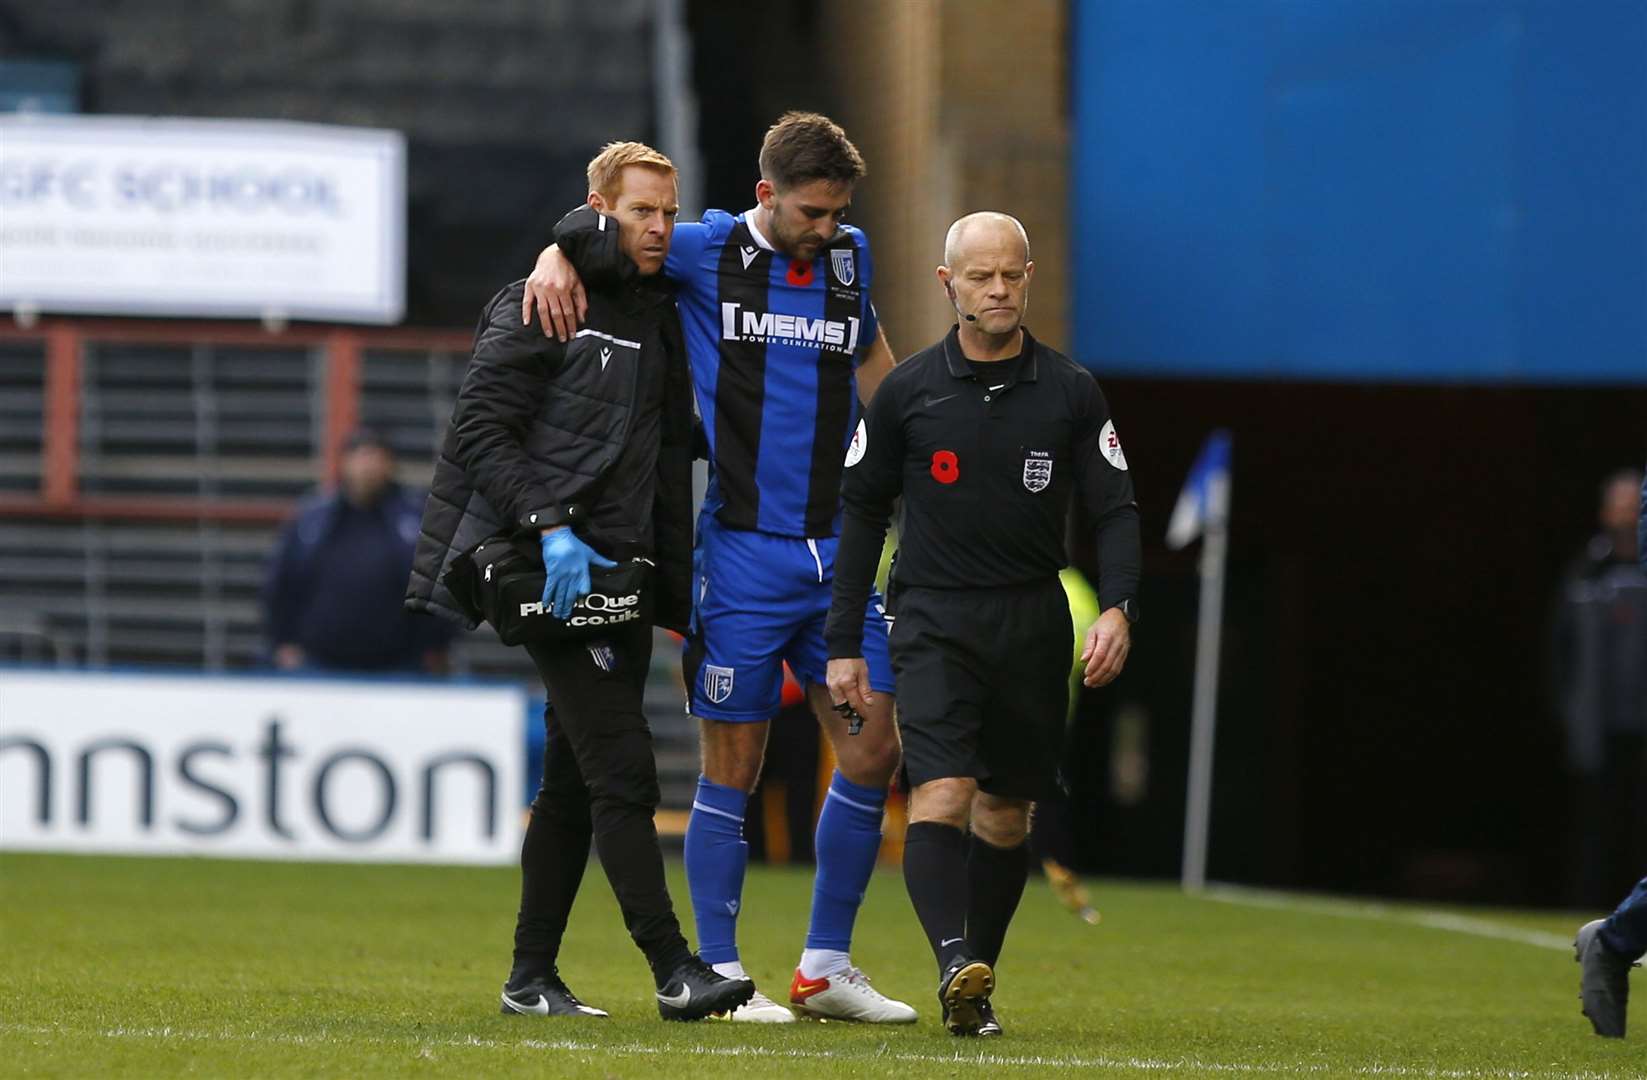 Robbie McKenzie helped from the field after being injured in a challenge Picture: Andy Jones